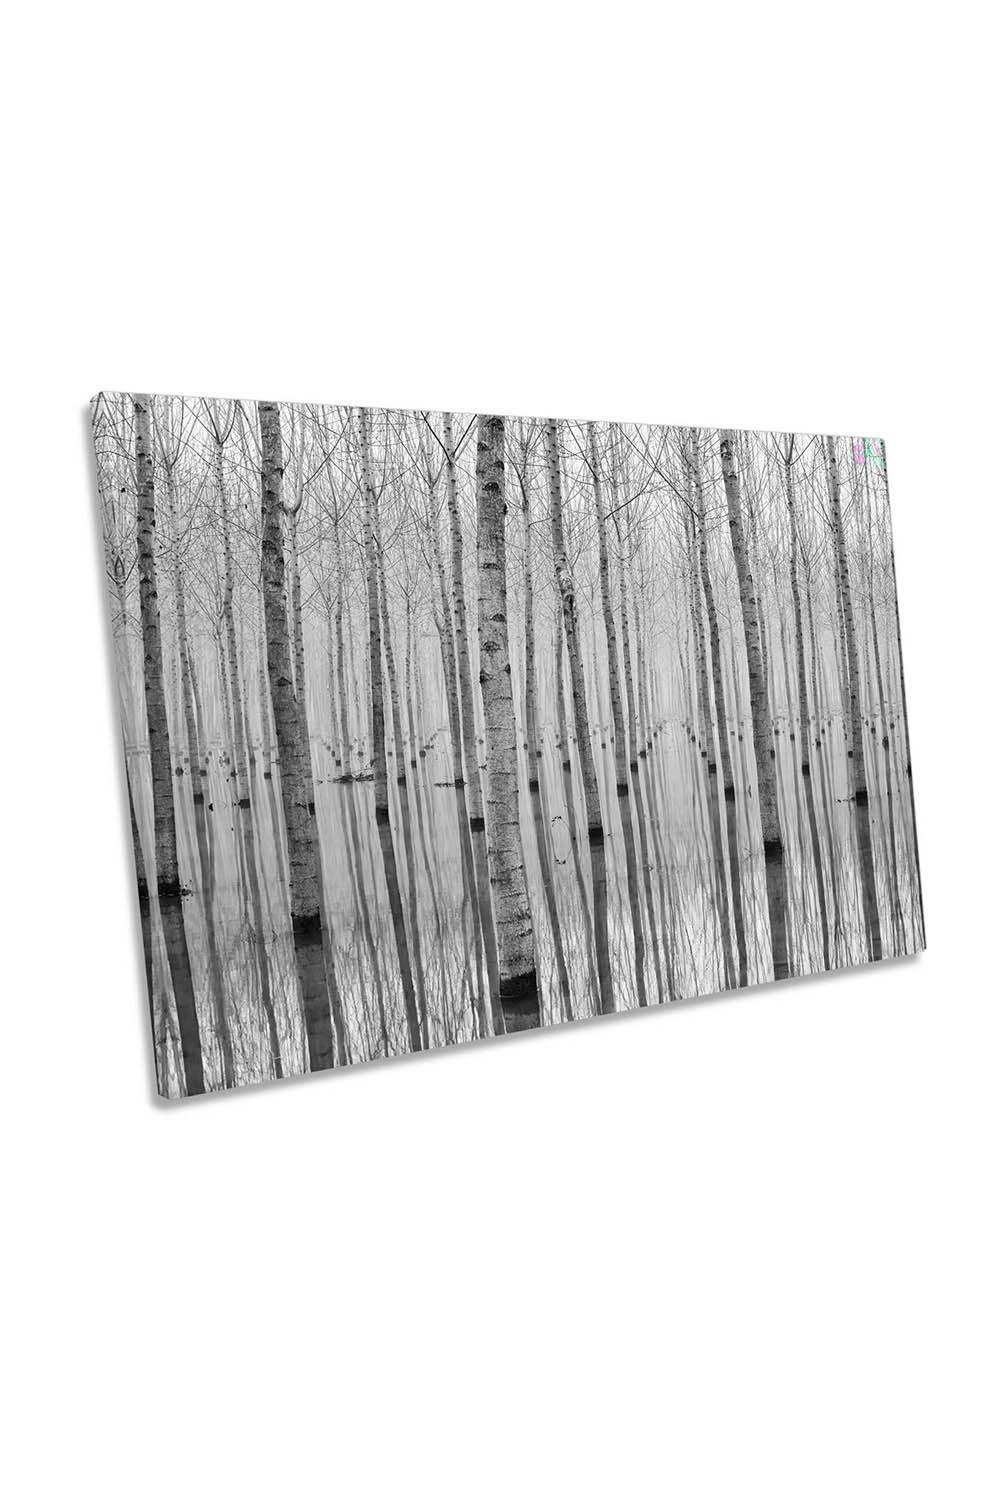 Birch Trees Forest Floral Grey Canvas Wall Art Picture Print